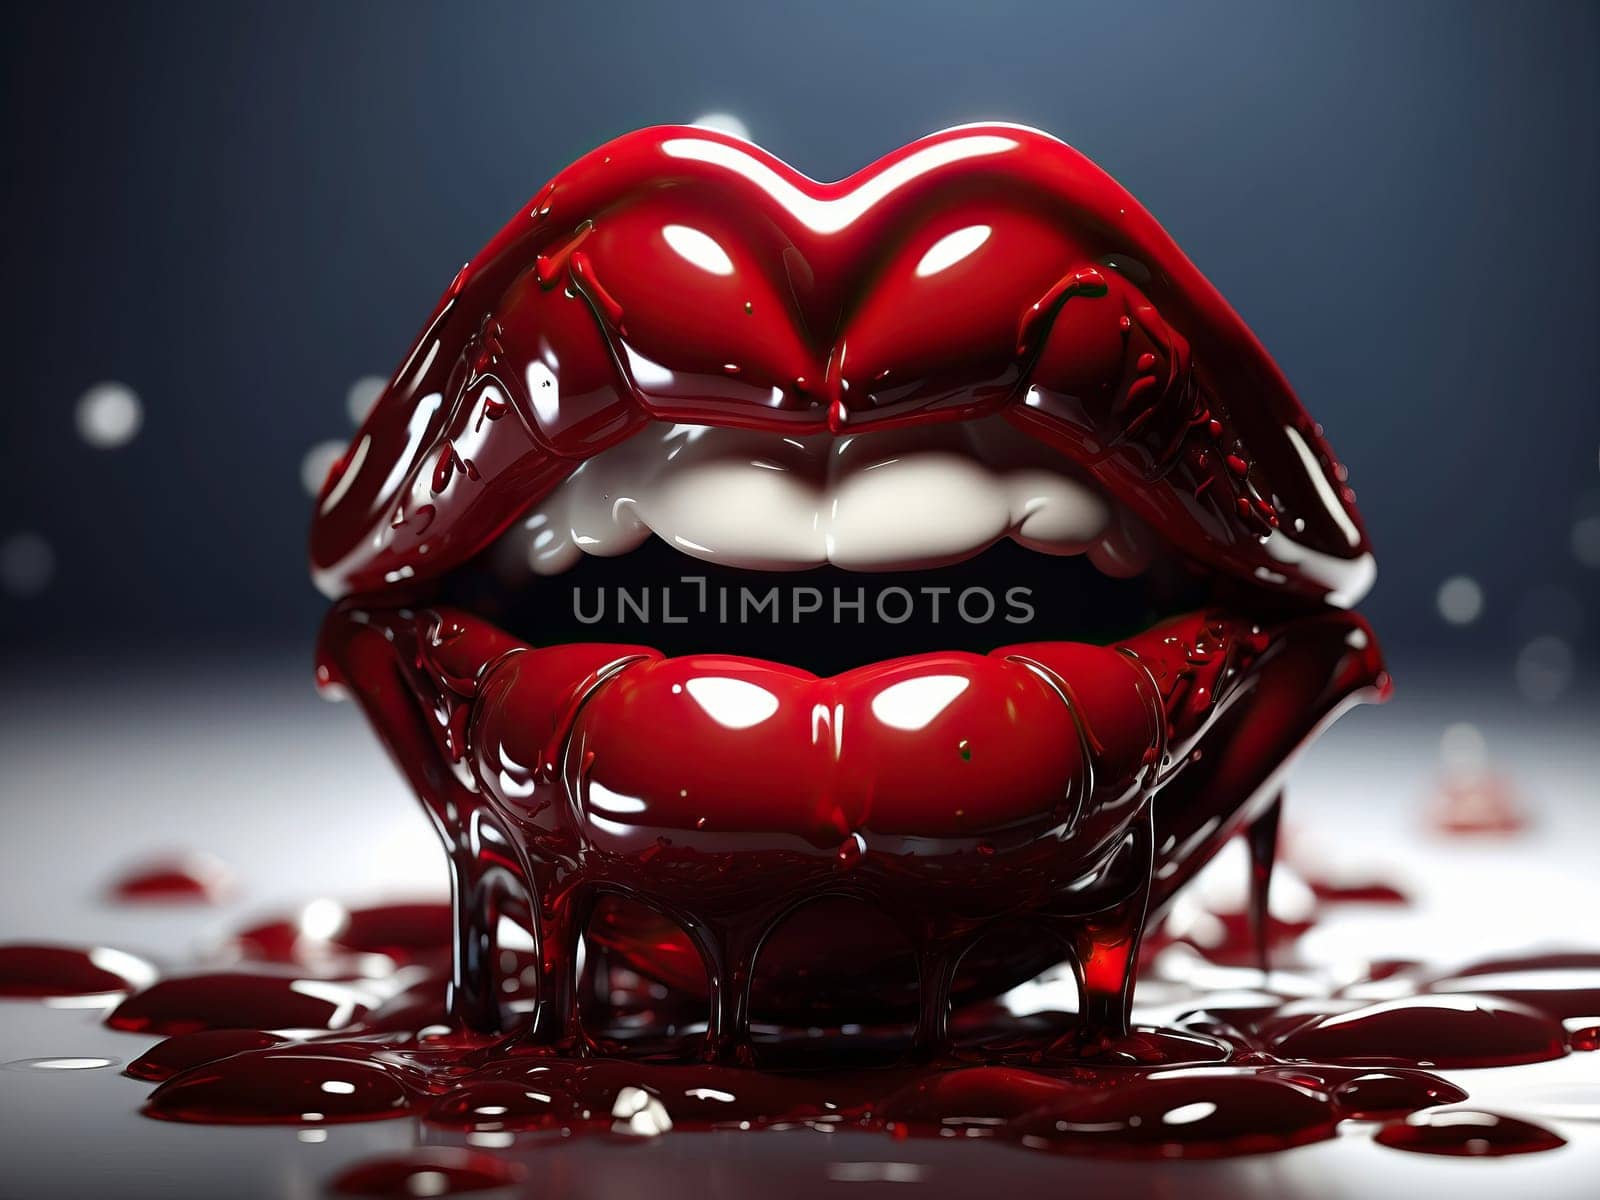 Dark red puckered lips, dripping kiss by applesstock